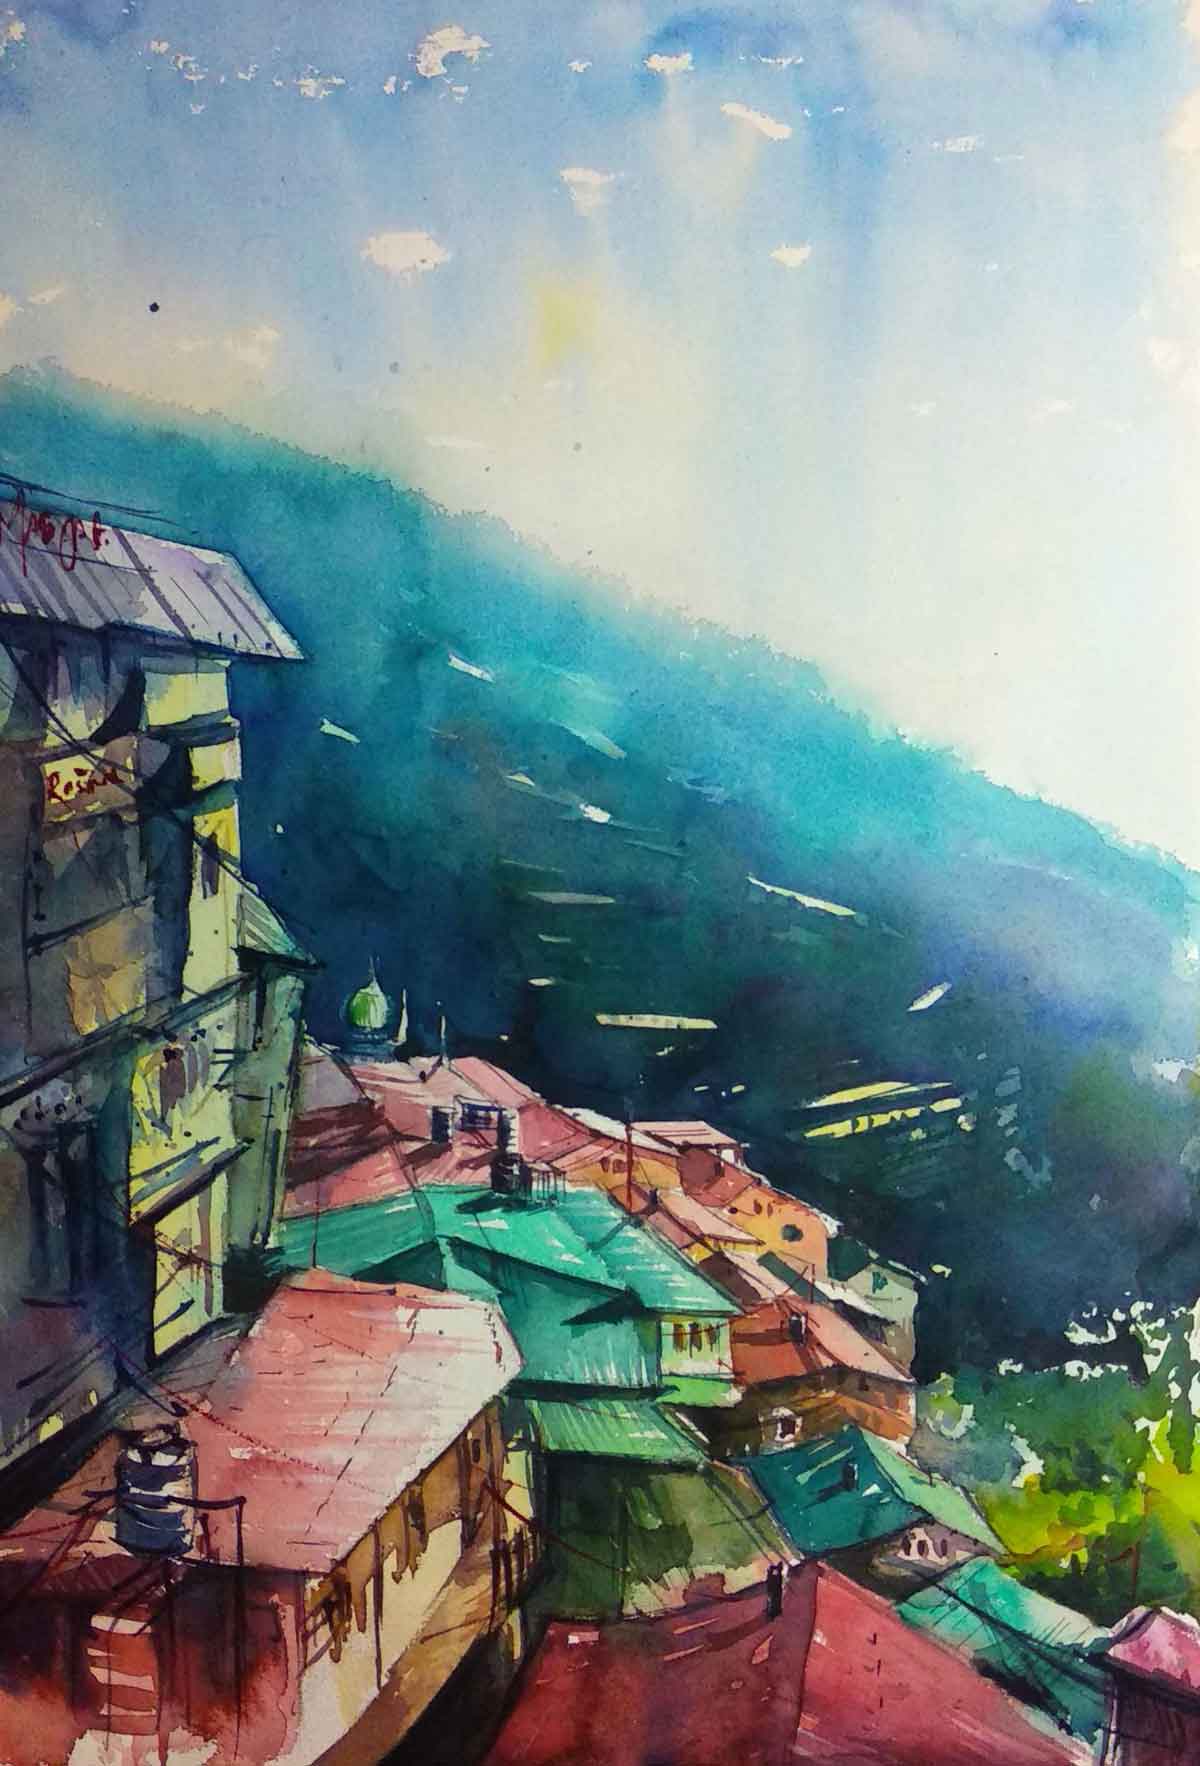 Semi Realistic Painting with Watercolor on Paper "Lower Bazar Shimla" art by Puran Thapa